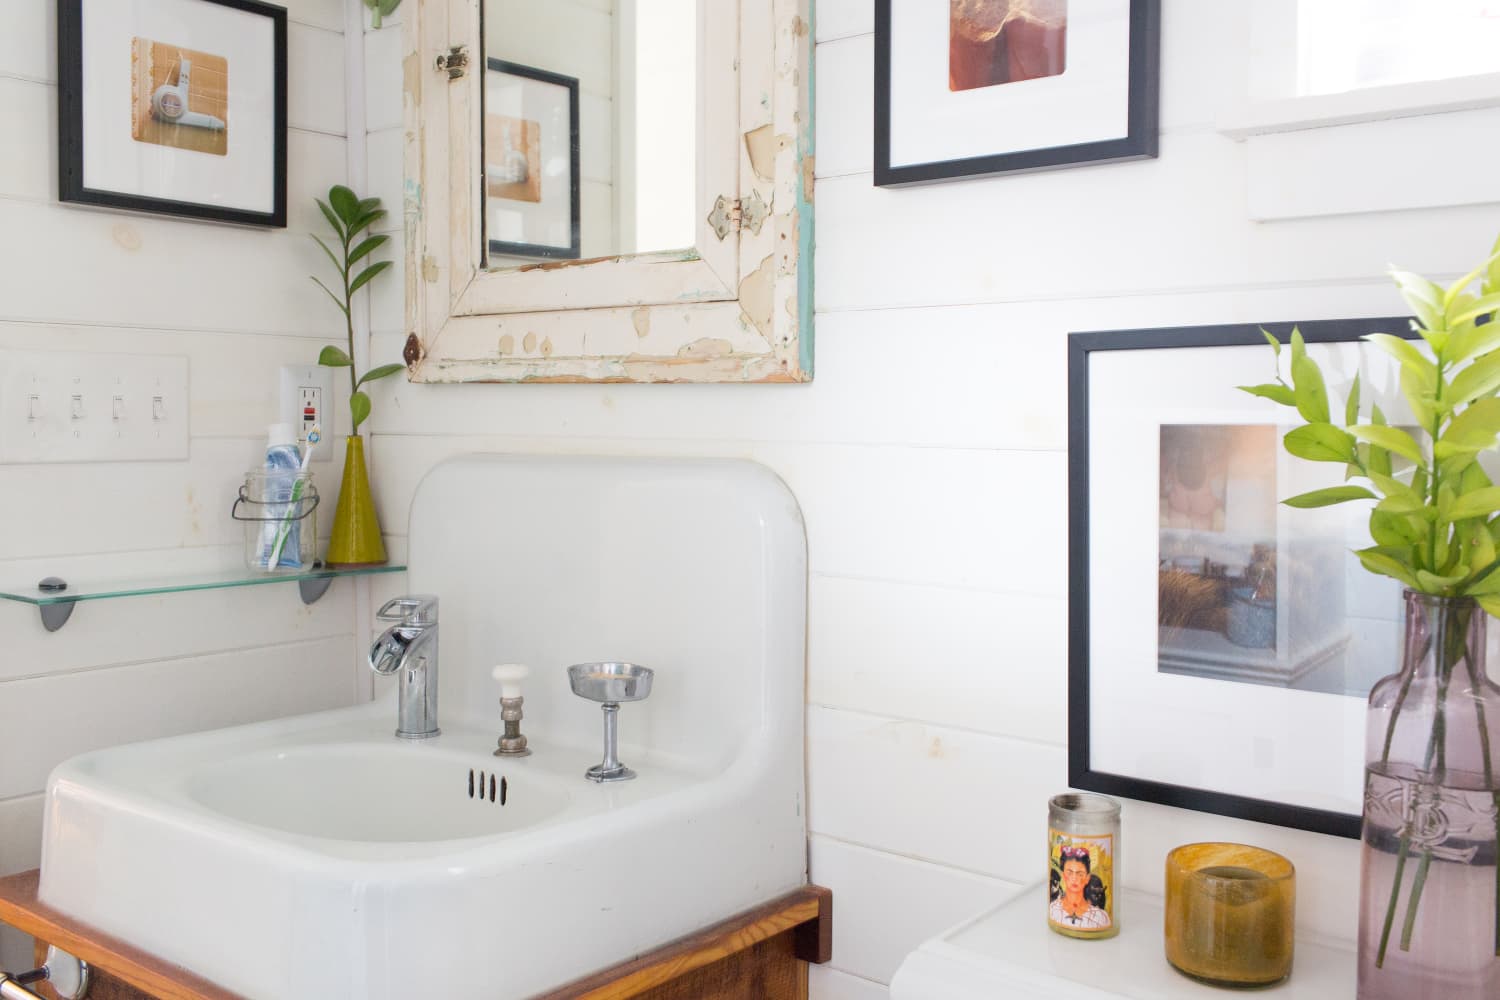 There’s One Part of Every Bathroom That Needs an Inside-Out Deep Clean